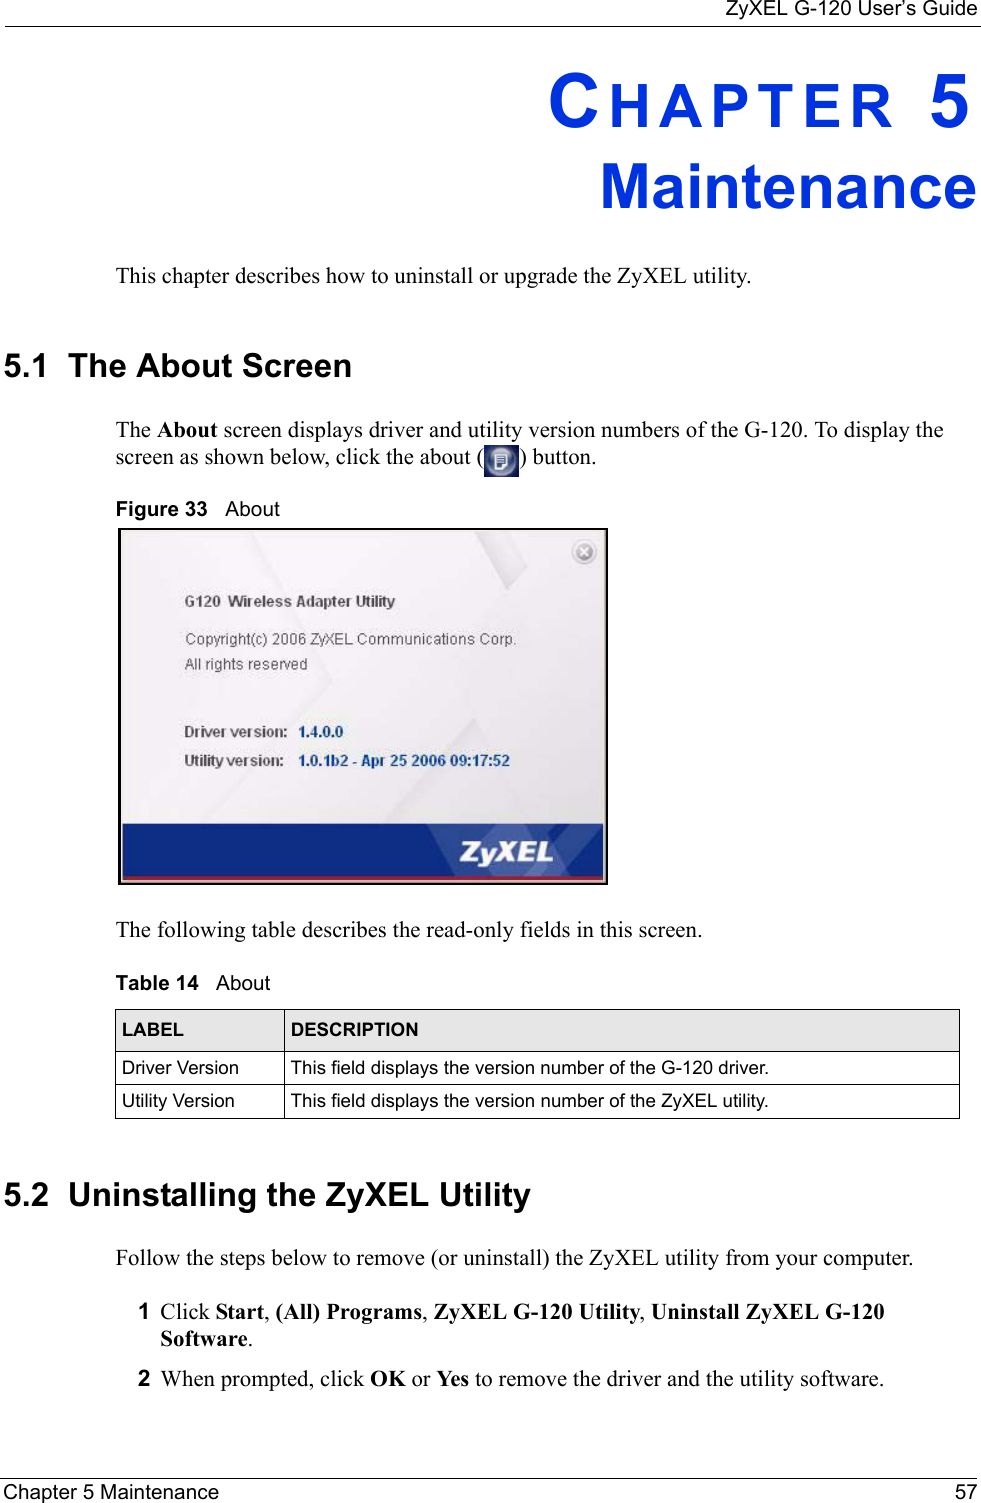 ZyXEL G-120 User’s GuideChapter 5 Maintenance 57CHAPTER 5MaintenanceThis chapter describes how to uninstall or upgrade the ZyXEL utility.5.1  The About Screen The About screen displays driver and utility version numbers of the G-120. To display the screen as shown below, click the about ( ) button.Figure 33   About The following table describes the read-only fields in this screen. 5.2  Uninstalling the ZyXEL Utility Follow the steps below to remove (or uninstall) the ZyXEL utility from your computer.1Click Start, (All) Programs, ZyXEL G-120 Utility, Uninstall ZyXEL G-120 Software.2When prompted, click OK or Yes  to remove the driver and the utility software.Table 14   About LABEL DESCRIPTIONDriver Version This field displays the version number of the G-120 driver.Utility Version This field displays the version number of the ZyXEL utility.